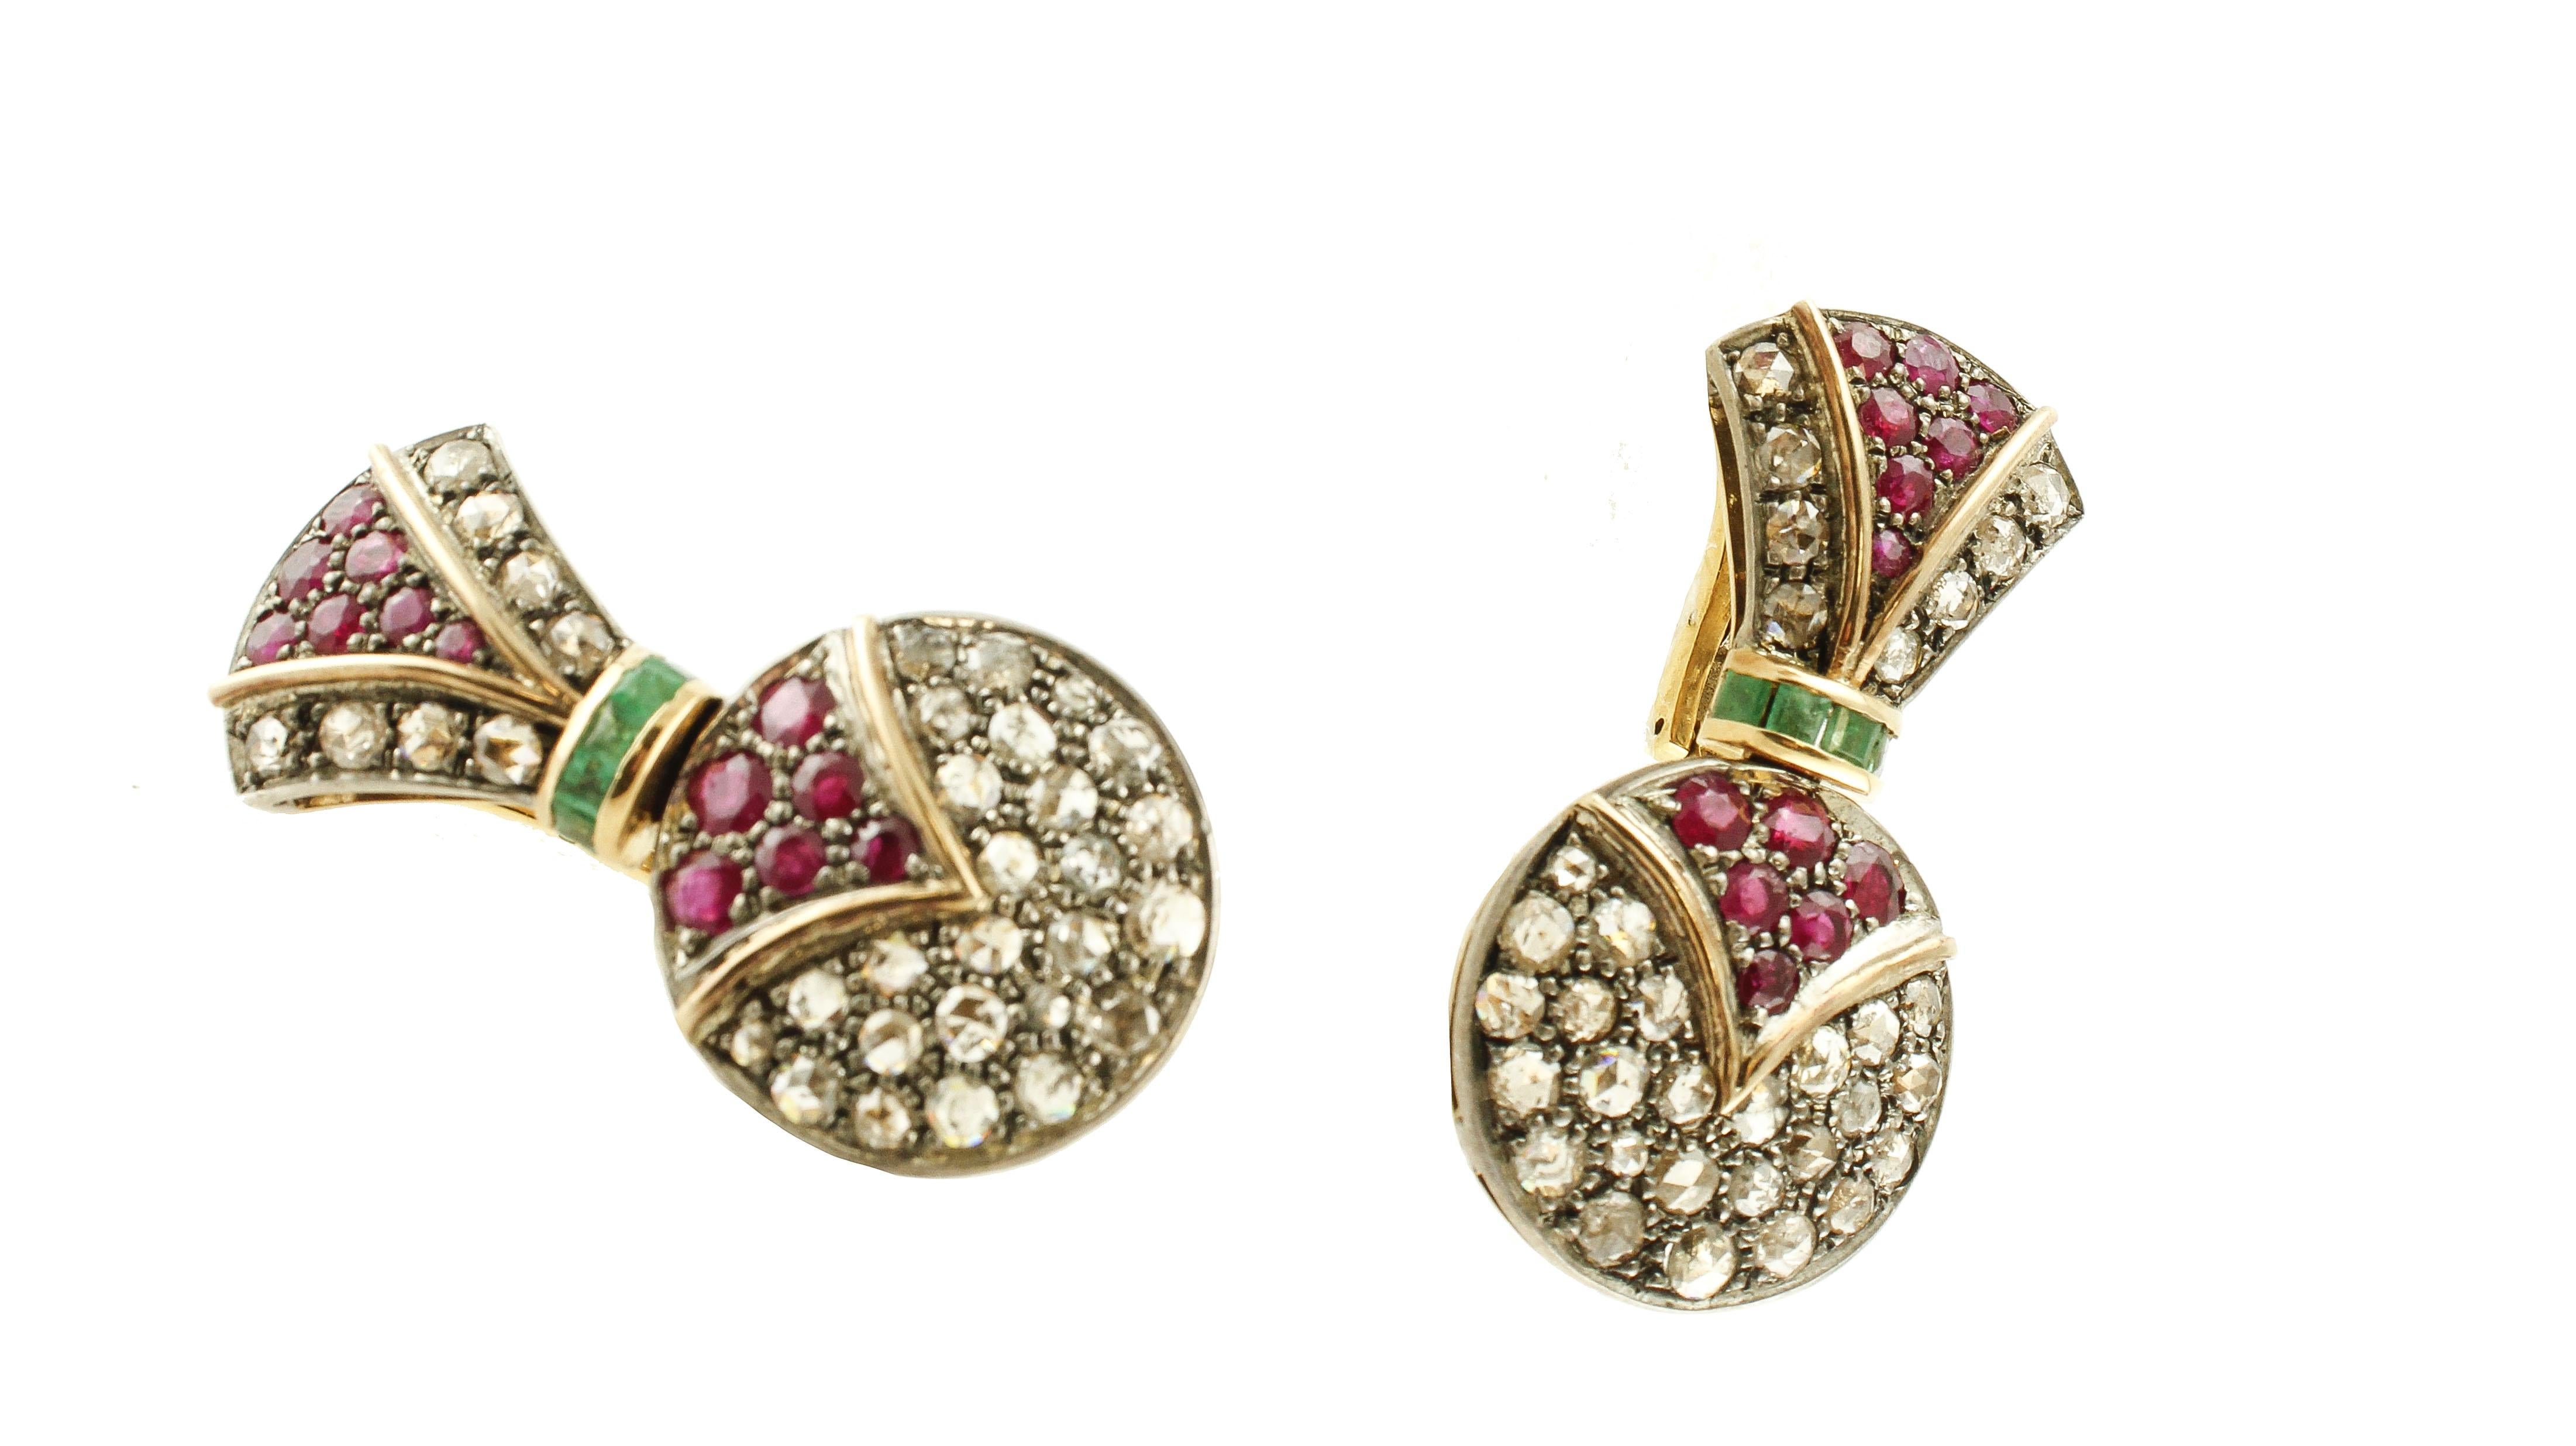 Mixed Cut Diamonds Rubies Emeralds Rose Gold and Silver Fashion Earrings